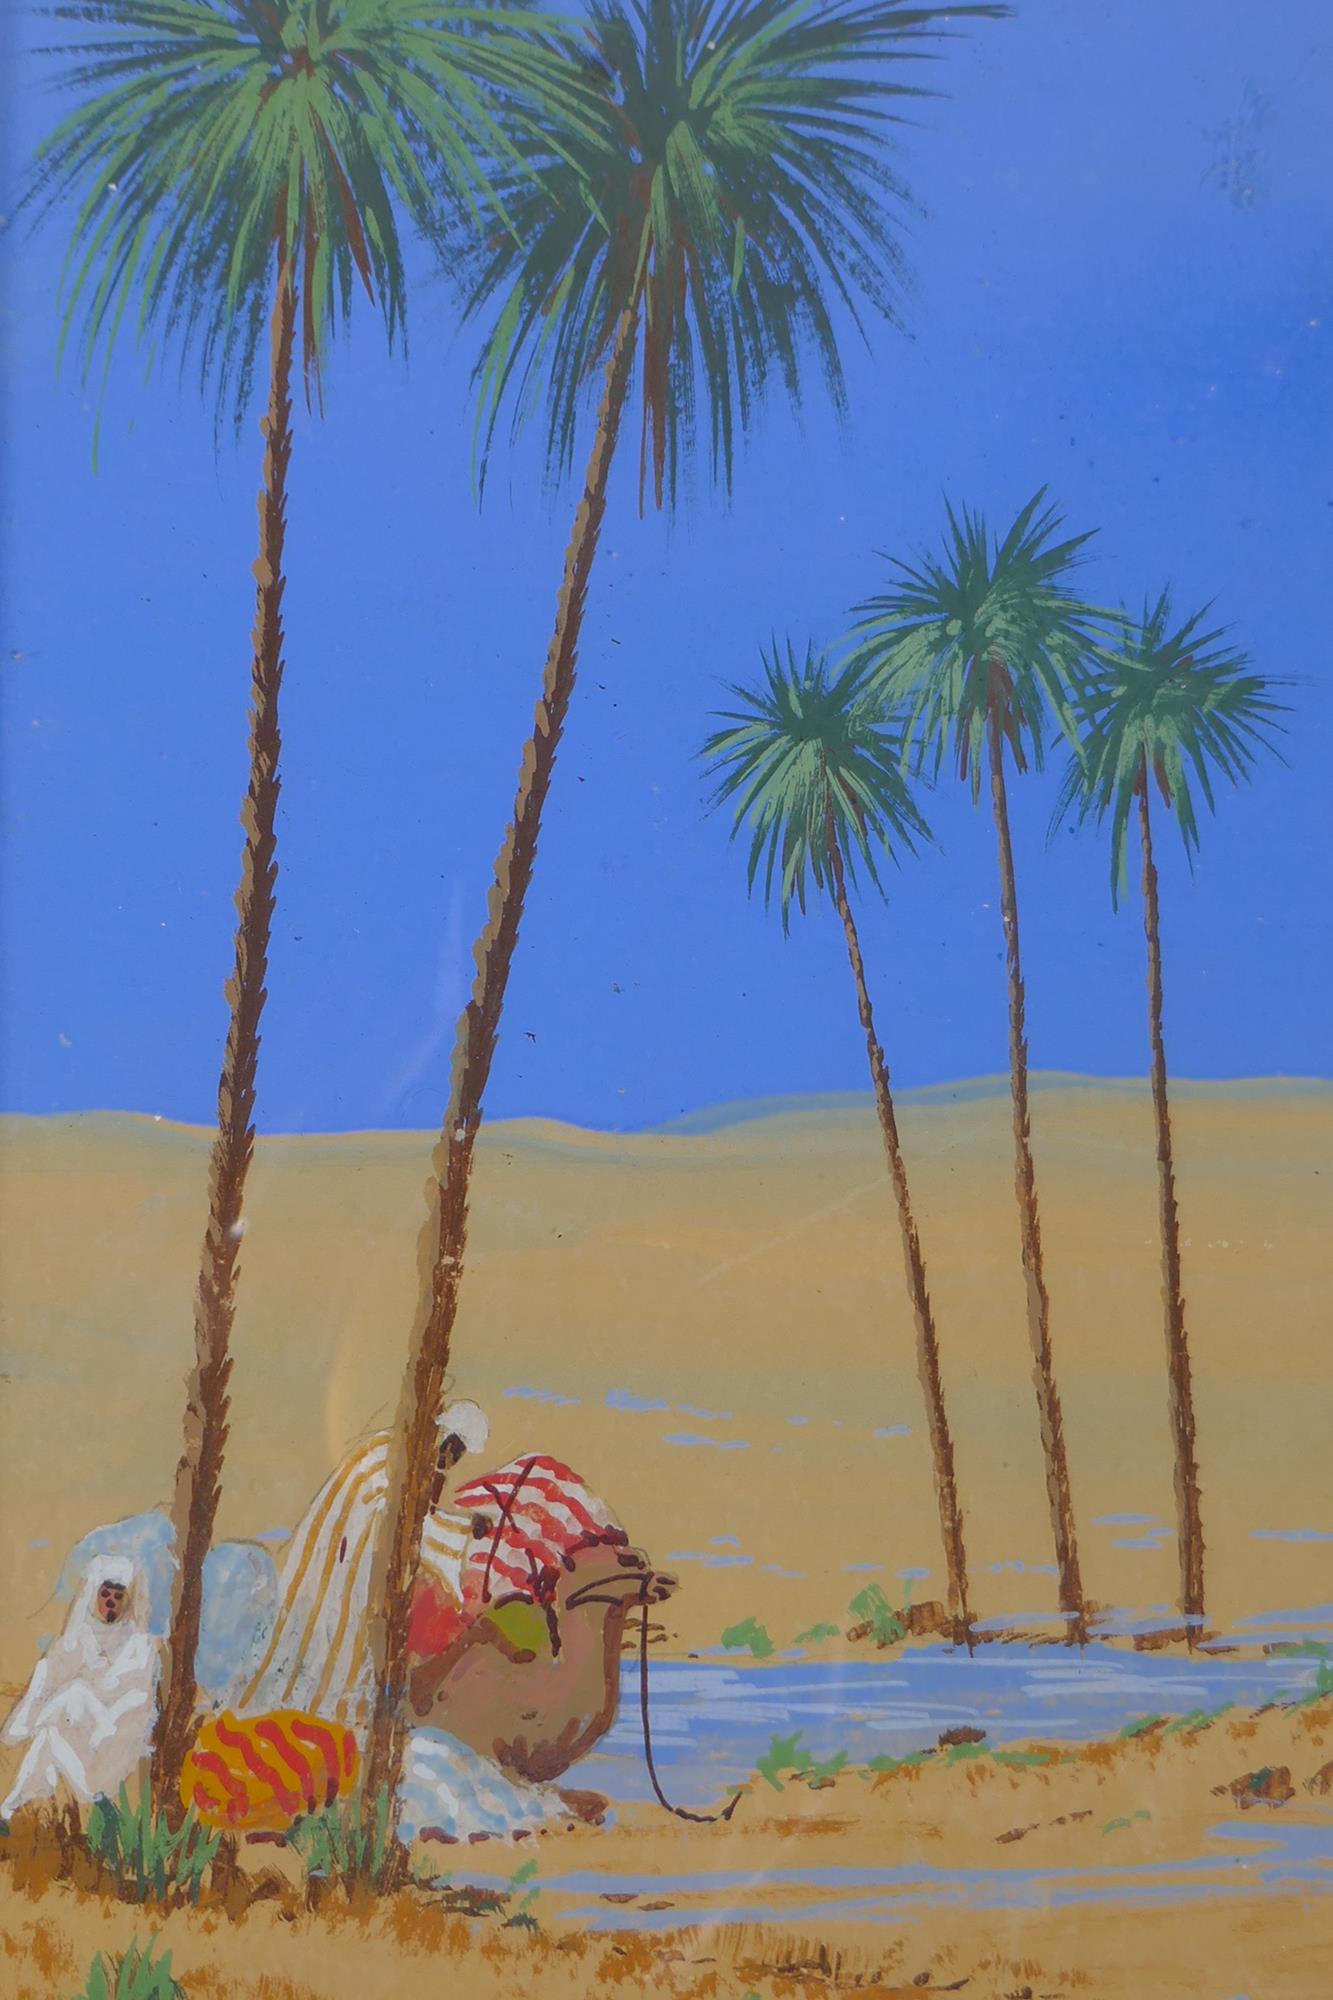 M. Dean, five desert landscapes with Arabs and camels, gouache on paper, largest 45 x 33cm - Image 5 of 8